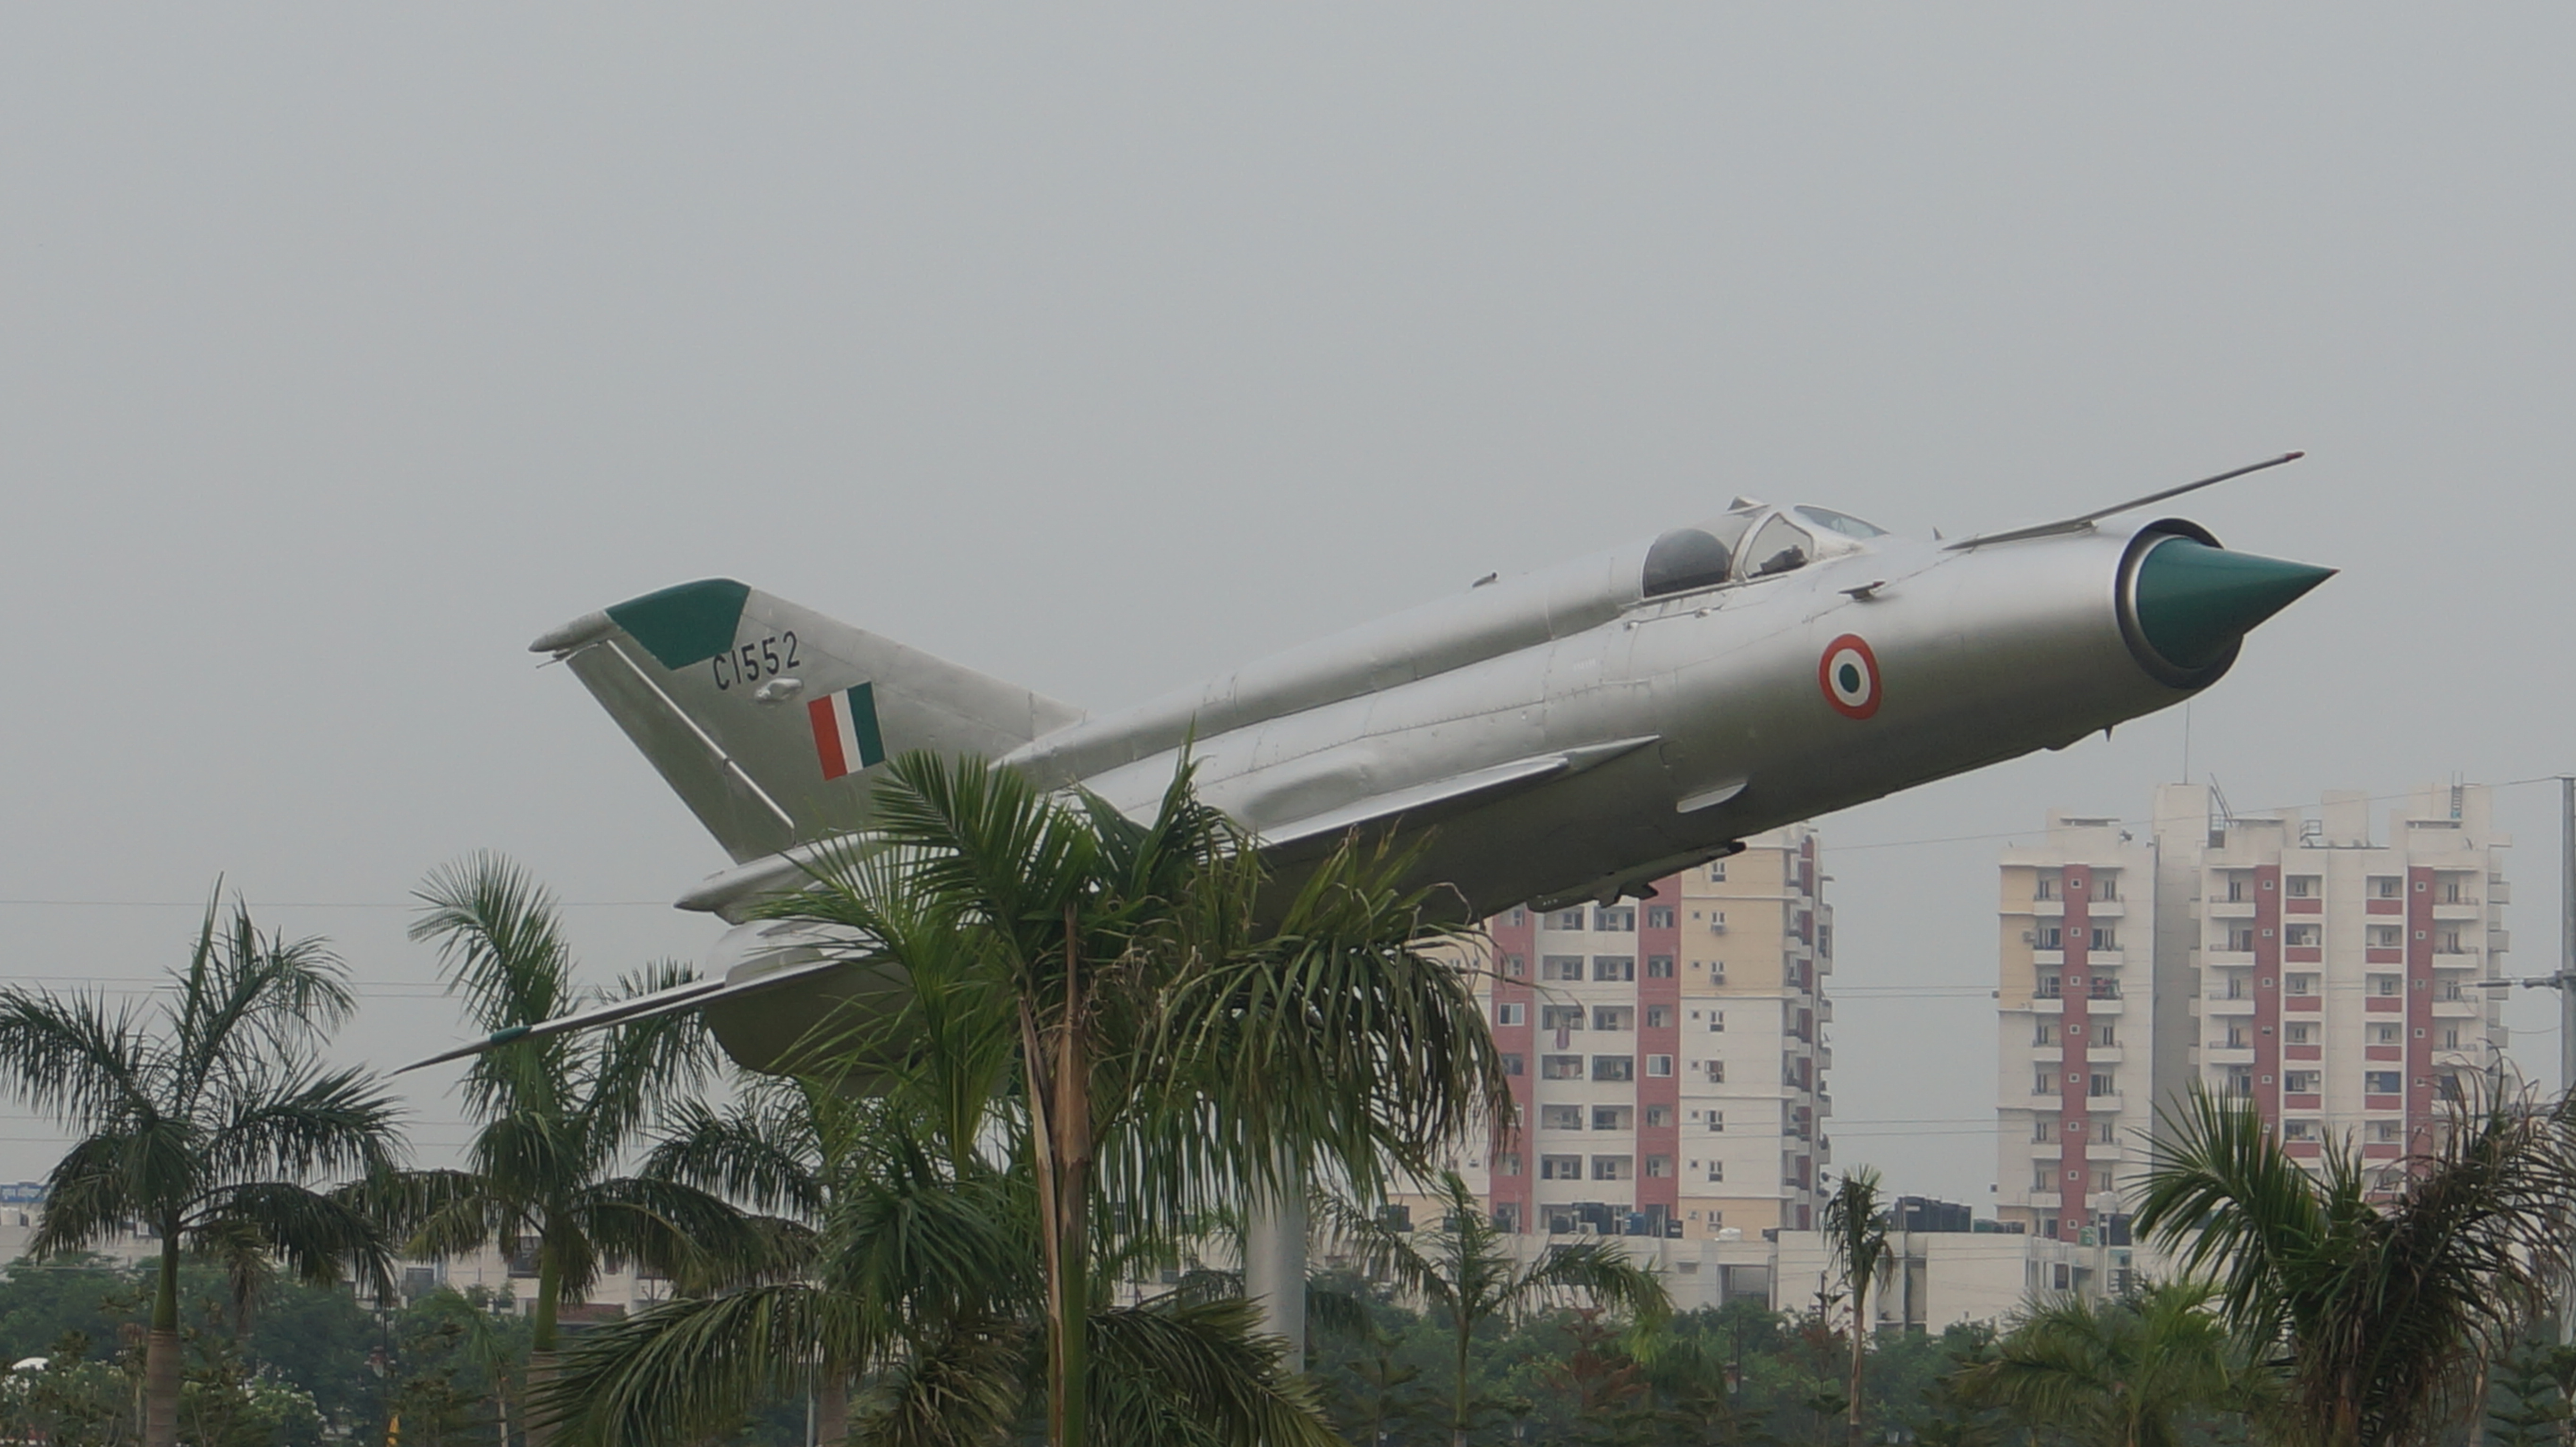 File:C1552 Indian Army jet.jpg - Wikimedia Commons